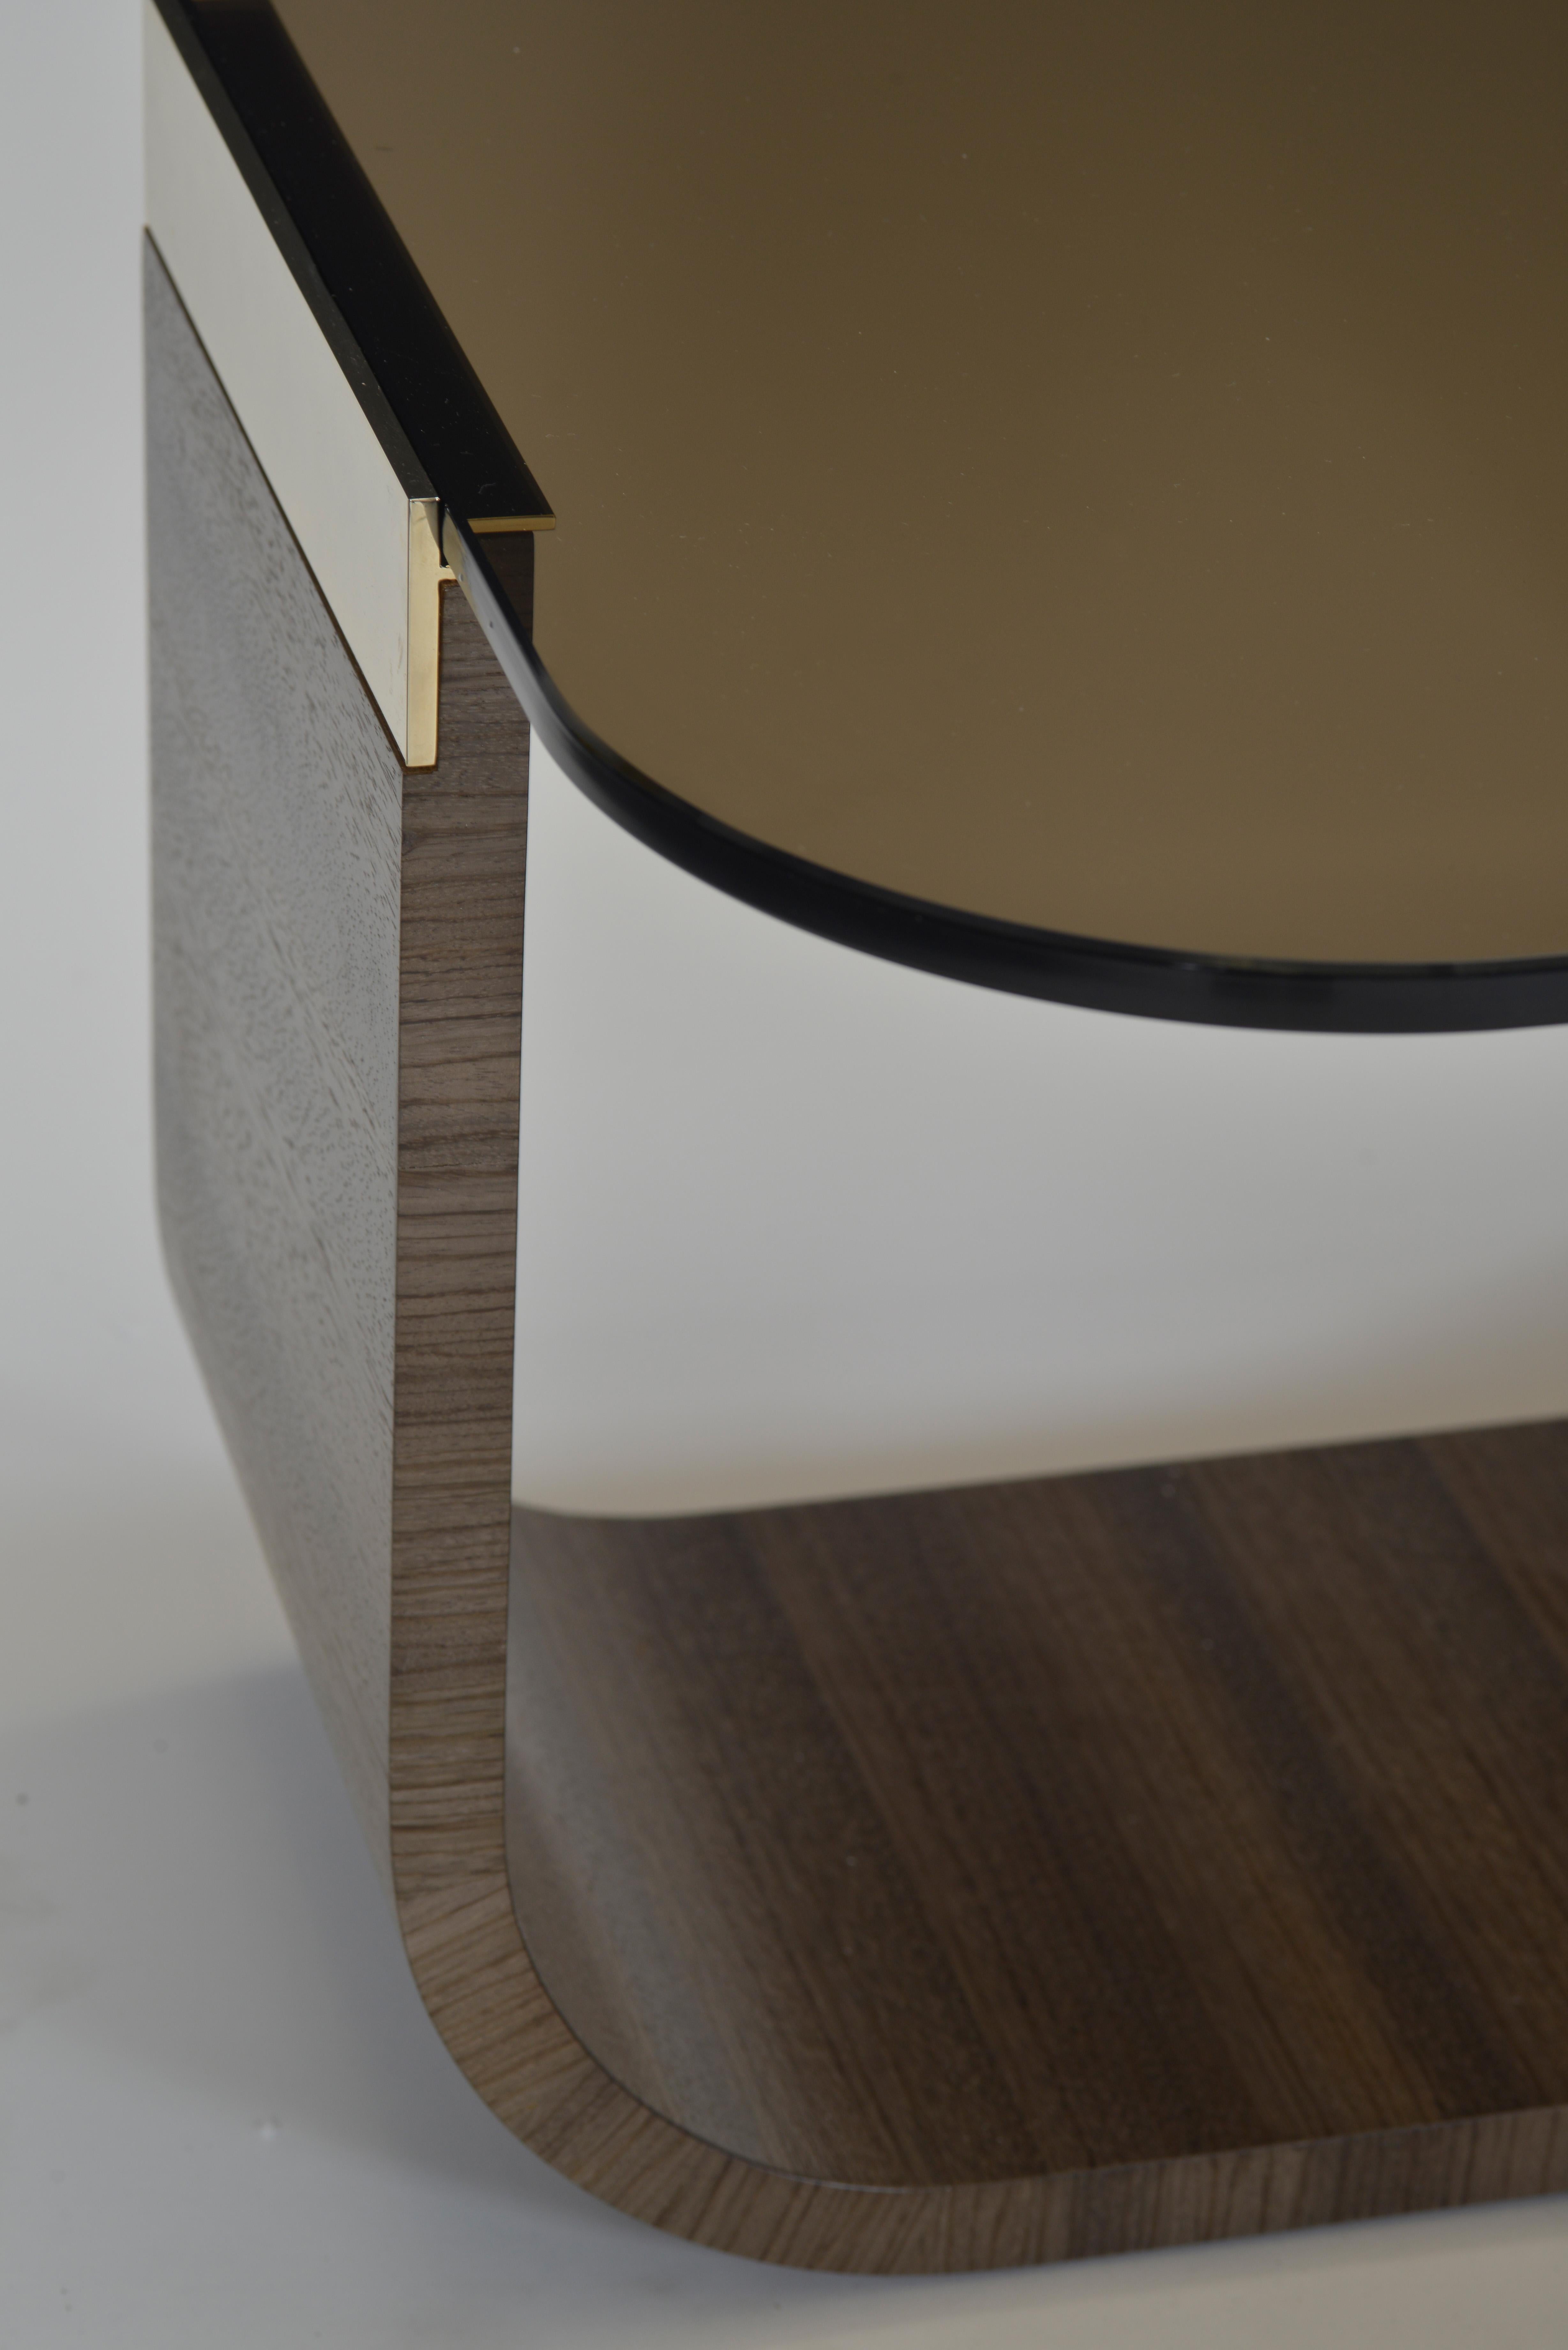 Cocktail table with gold-plated accents in choice of grigio leather or gray Zebrano veneer. The leather base comes standard with stitching accenting the perimeter. Options for the top include bronze glass or white limestone. Overall dimensions of